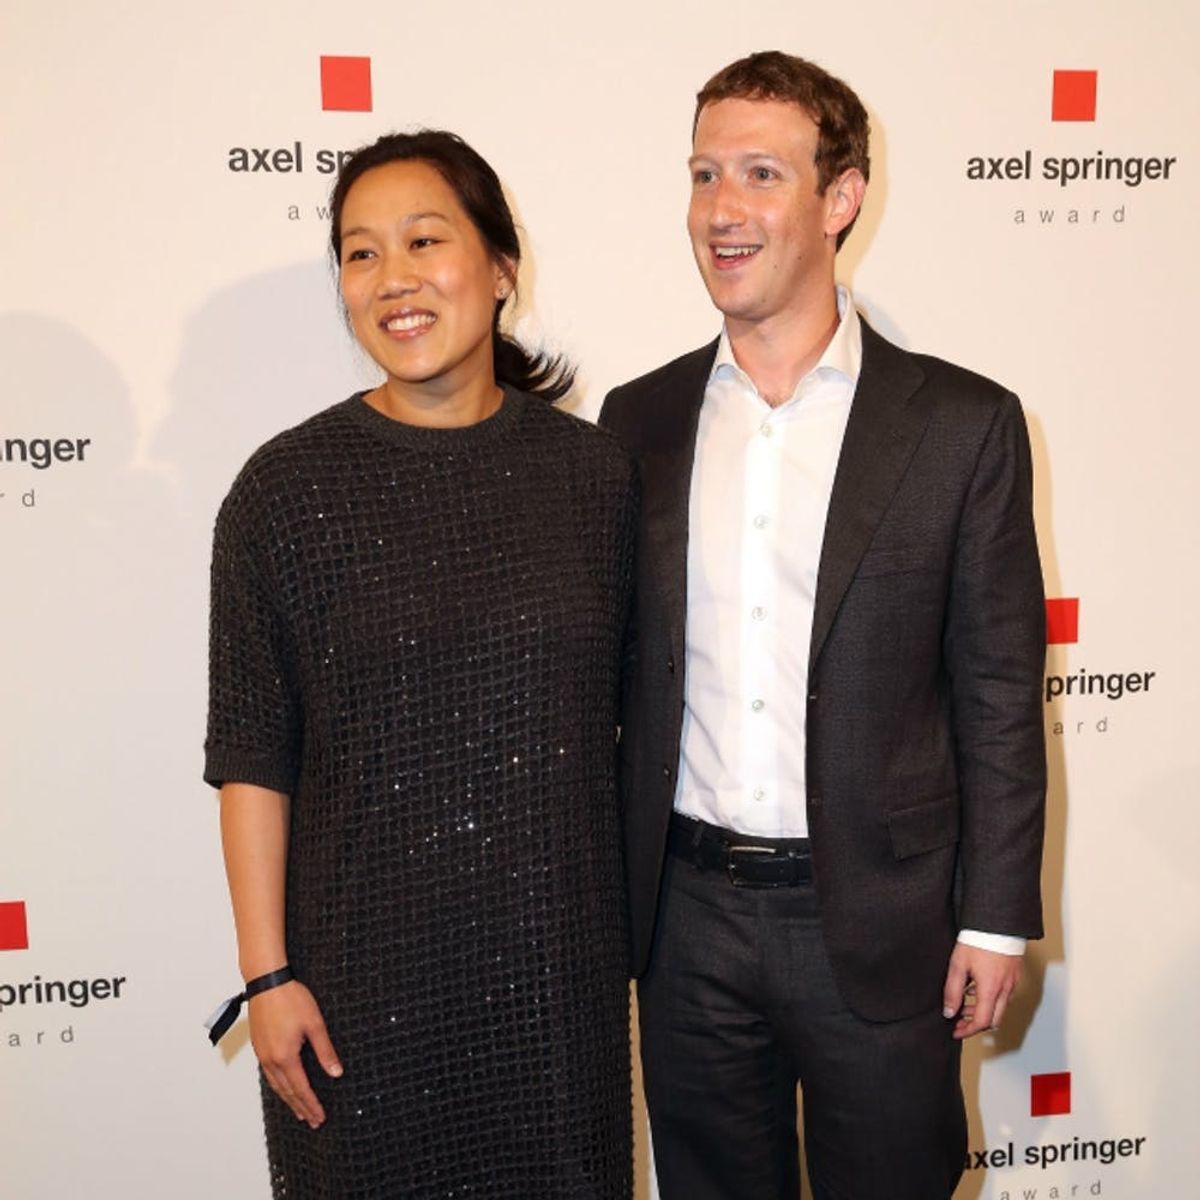 Mark Zuckerberg and Priscilla Chan Are Expecting Their Second Baby